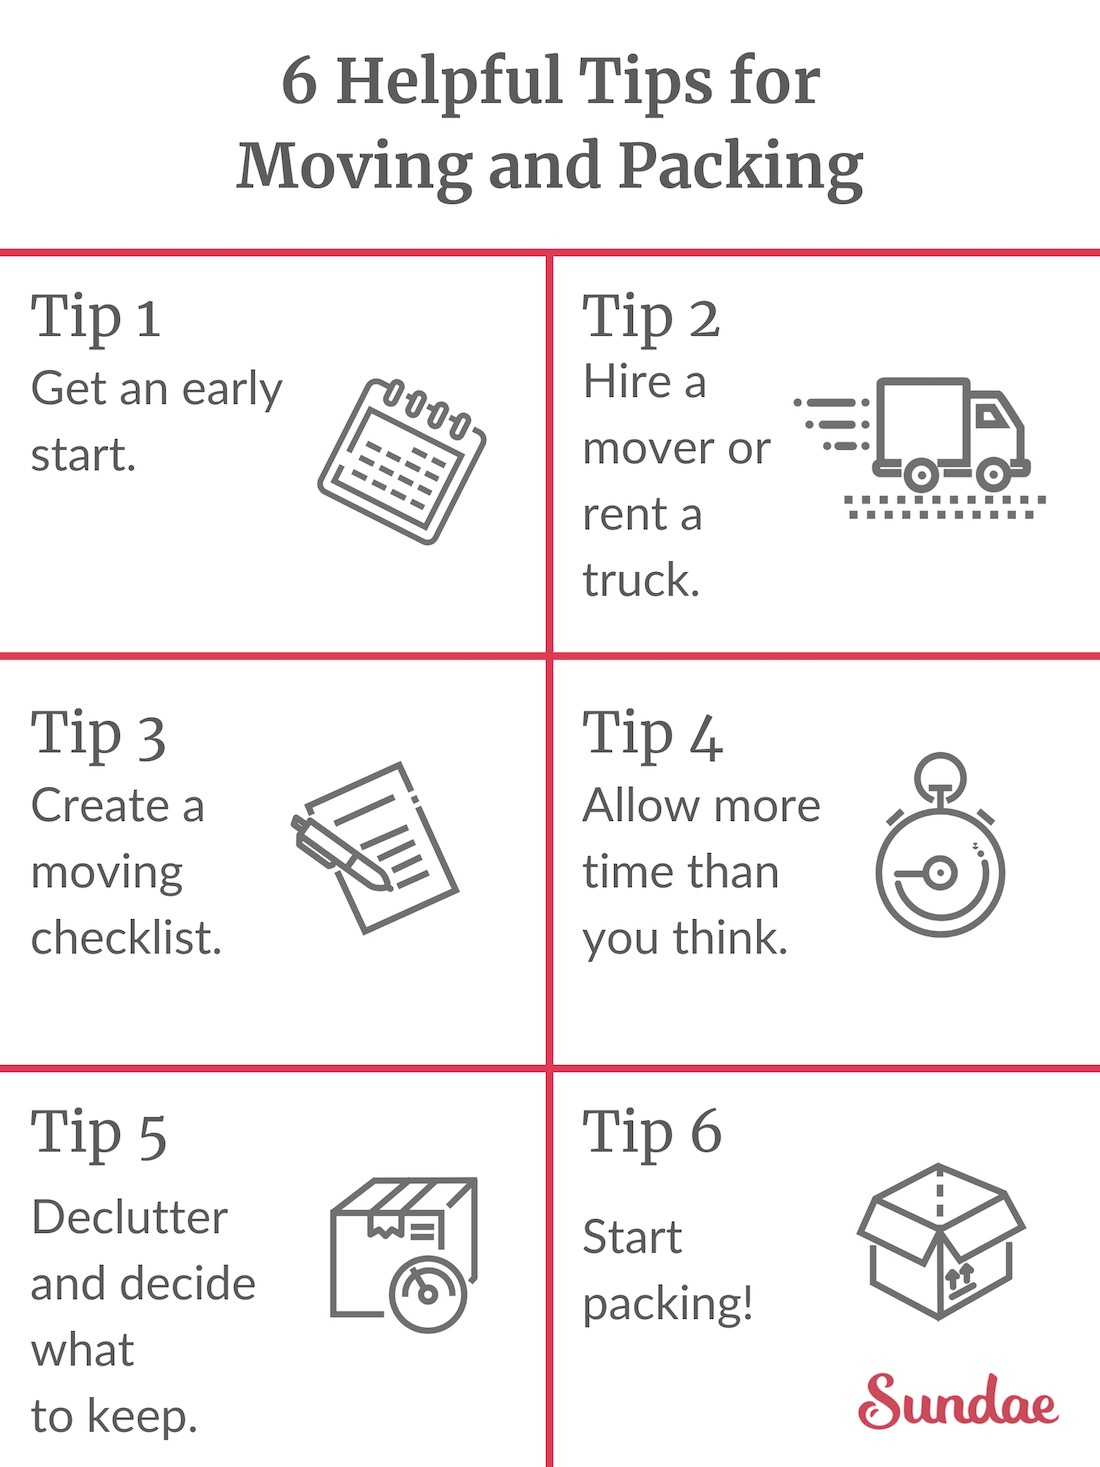 6 Tips for Moving